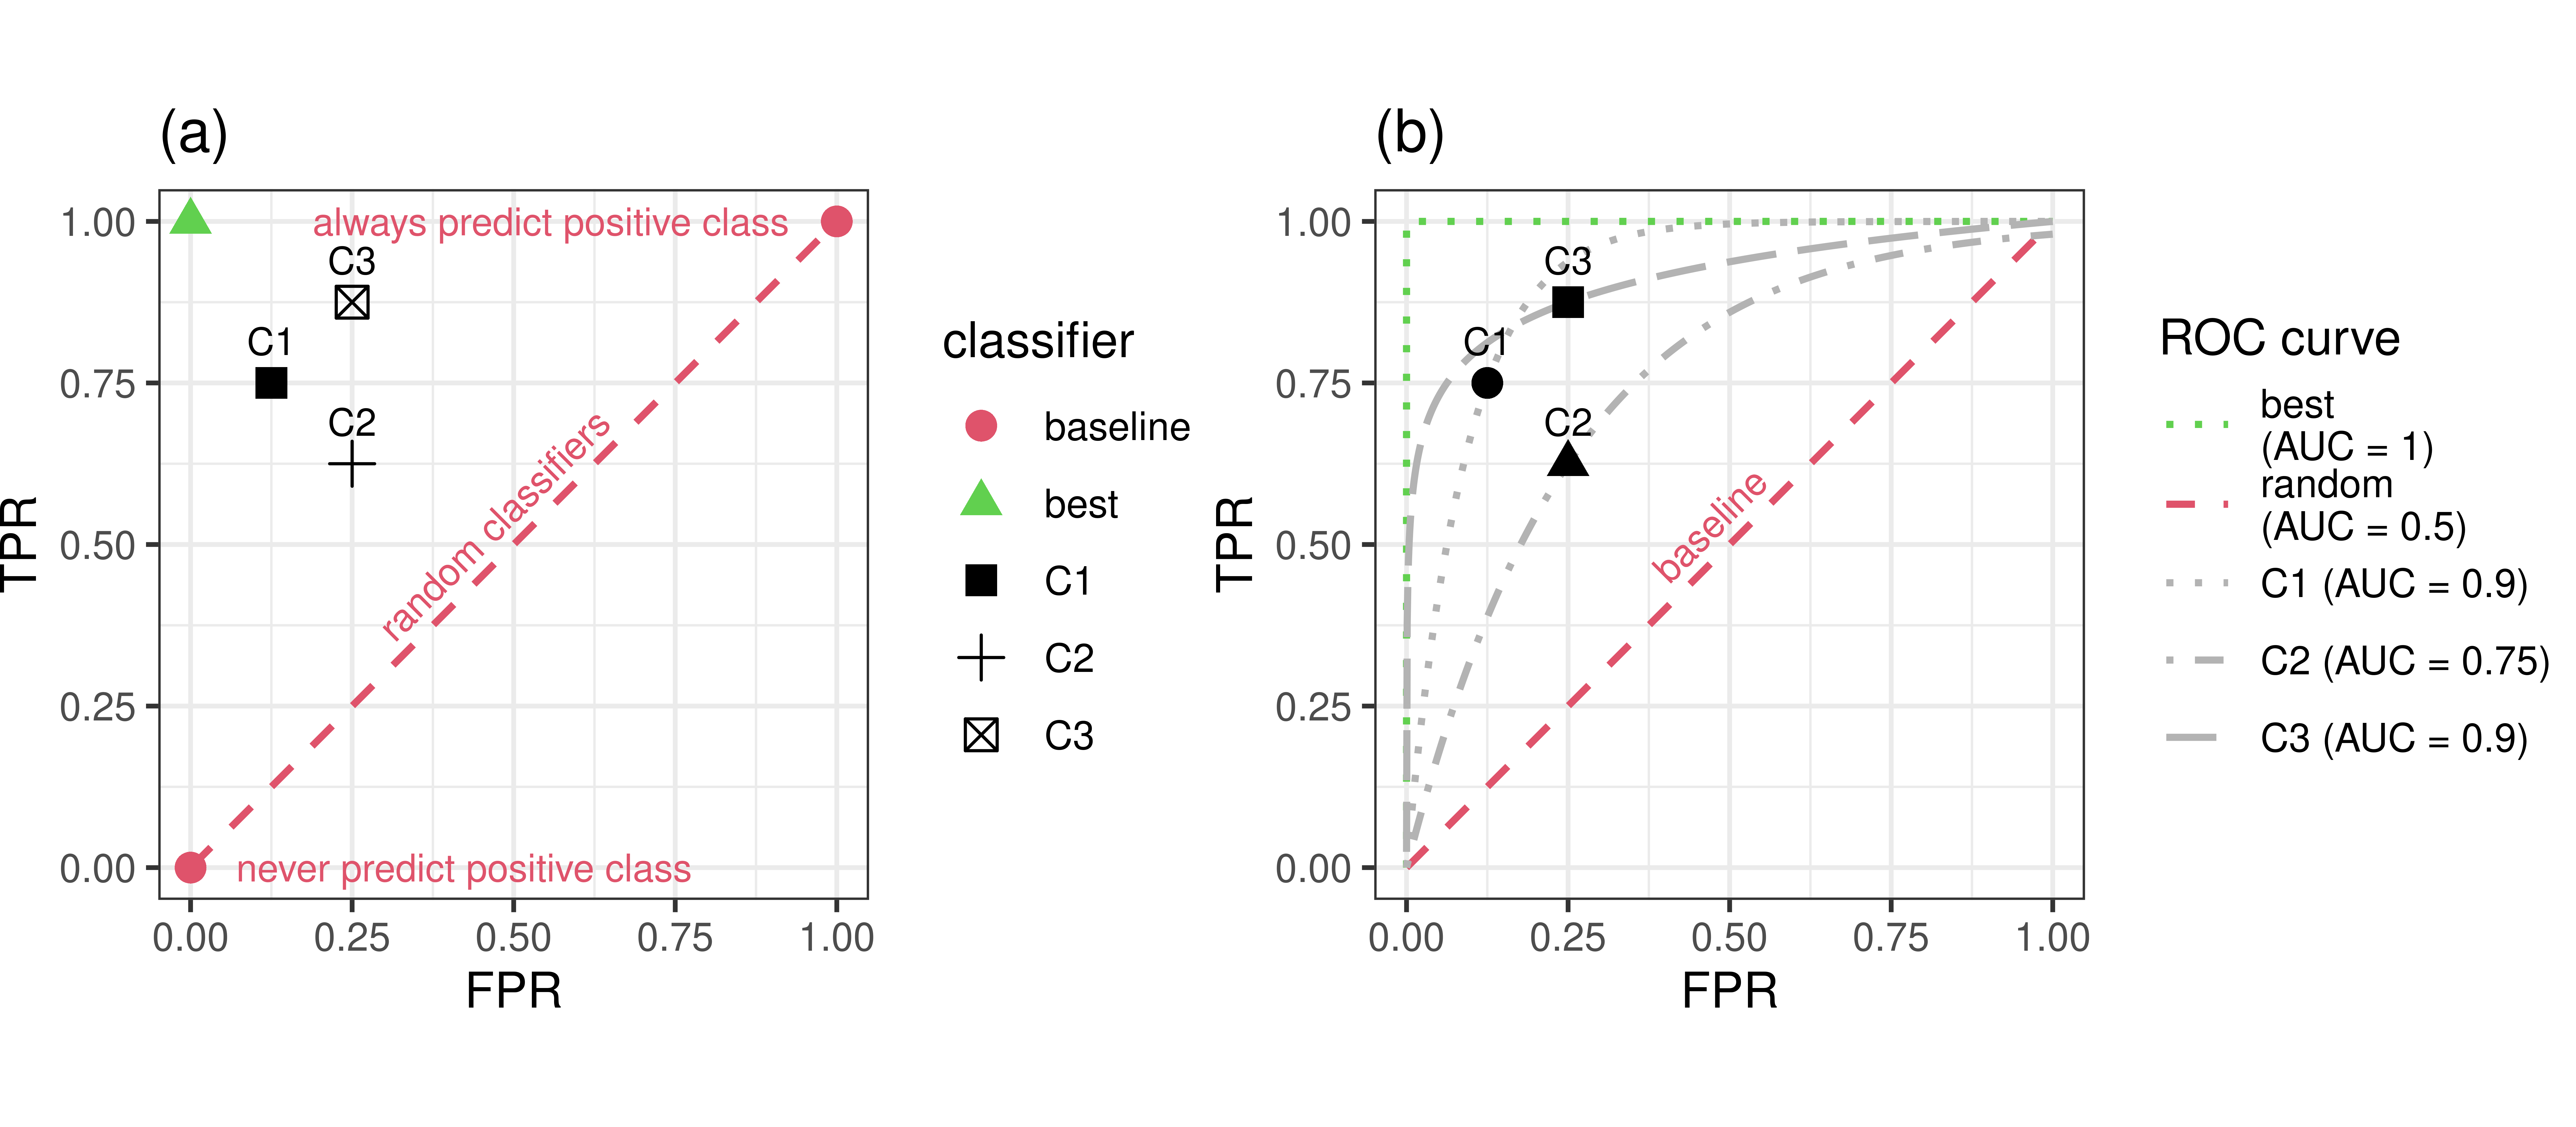 Two plots labeled (a) and (b). Both have 'FPR' between 0-1 on x-axis and 'TPR' between 0-1 on y-axis, both also have a diagonal line y=x with text 'baseline (random classifiers)'. (a): There is a green dot in upper left corner at (0,1). There is a triangle labeled C1 at around (0.1,0.75), a square labeled C2 at around (0.24, 0.75), and a plus labeled C3 at around (0.25, 0.8). (b) is same as (a) except now there are three dashed lines such that each of the points from (a) lies on one of these lines. The lines roughly curve from (0,0) towards (0,1) and then to (1,1)